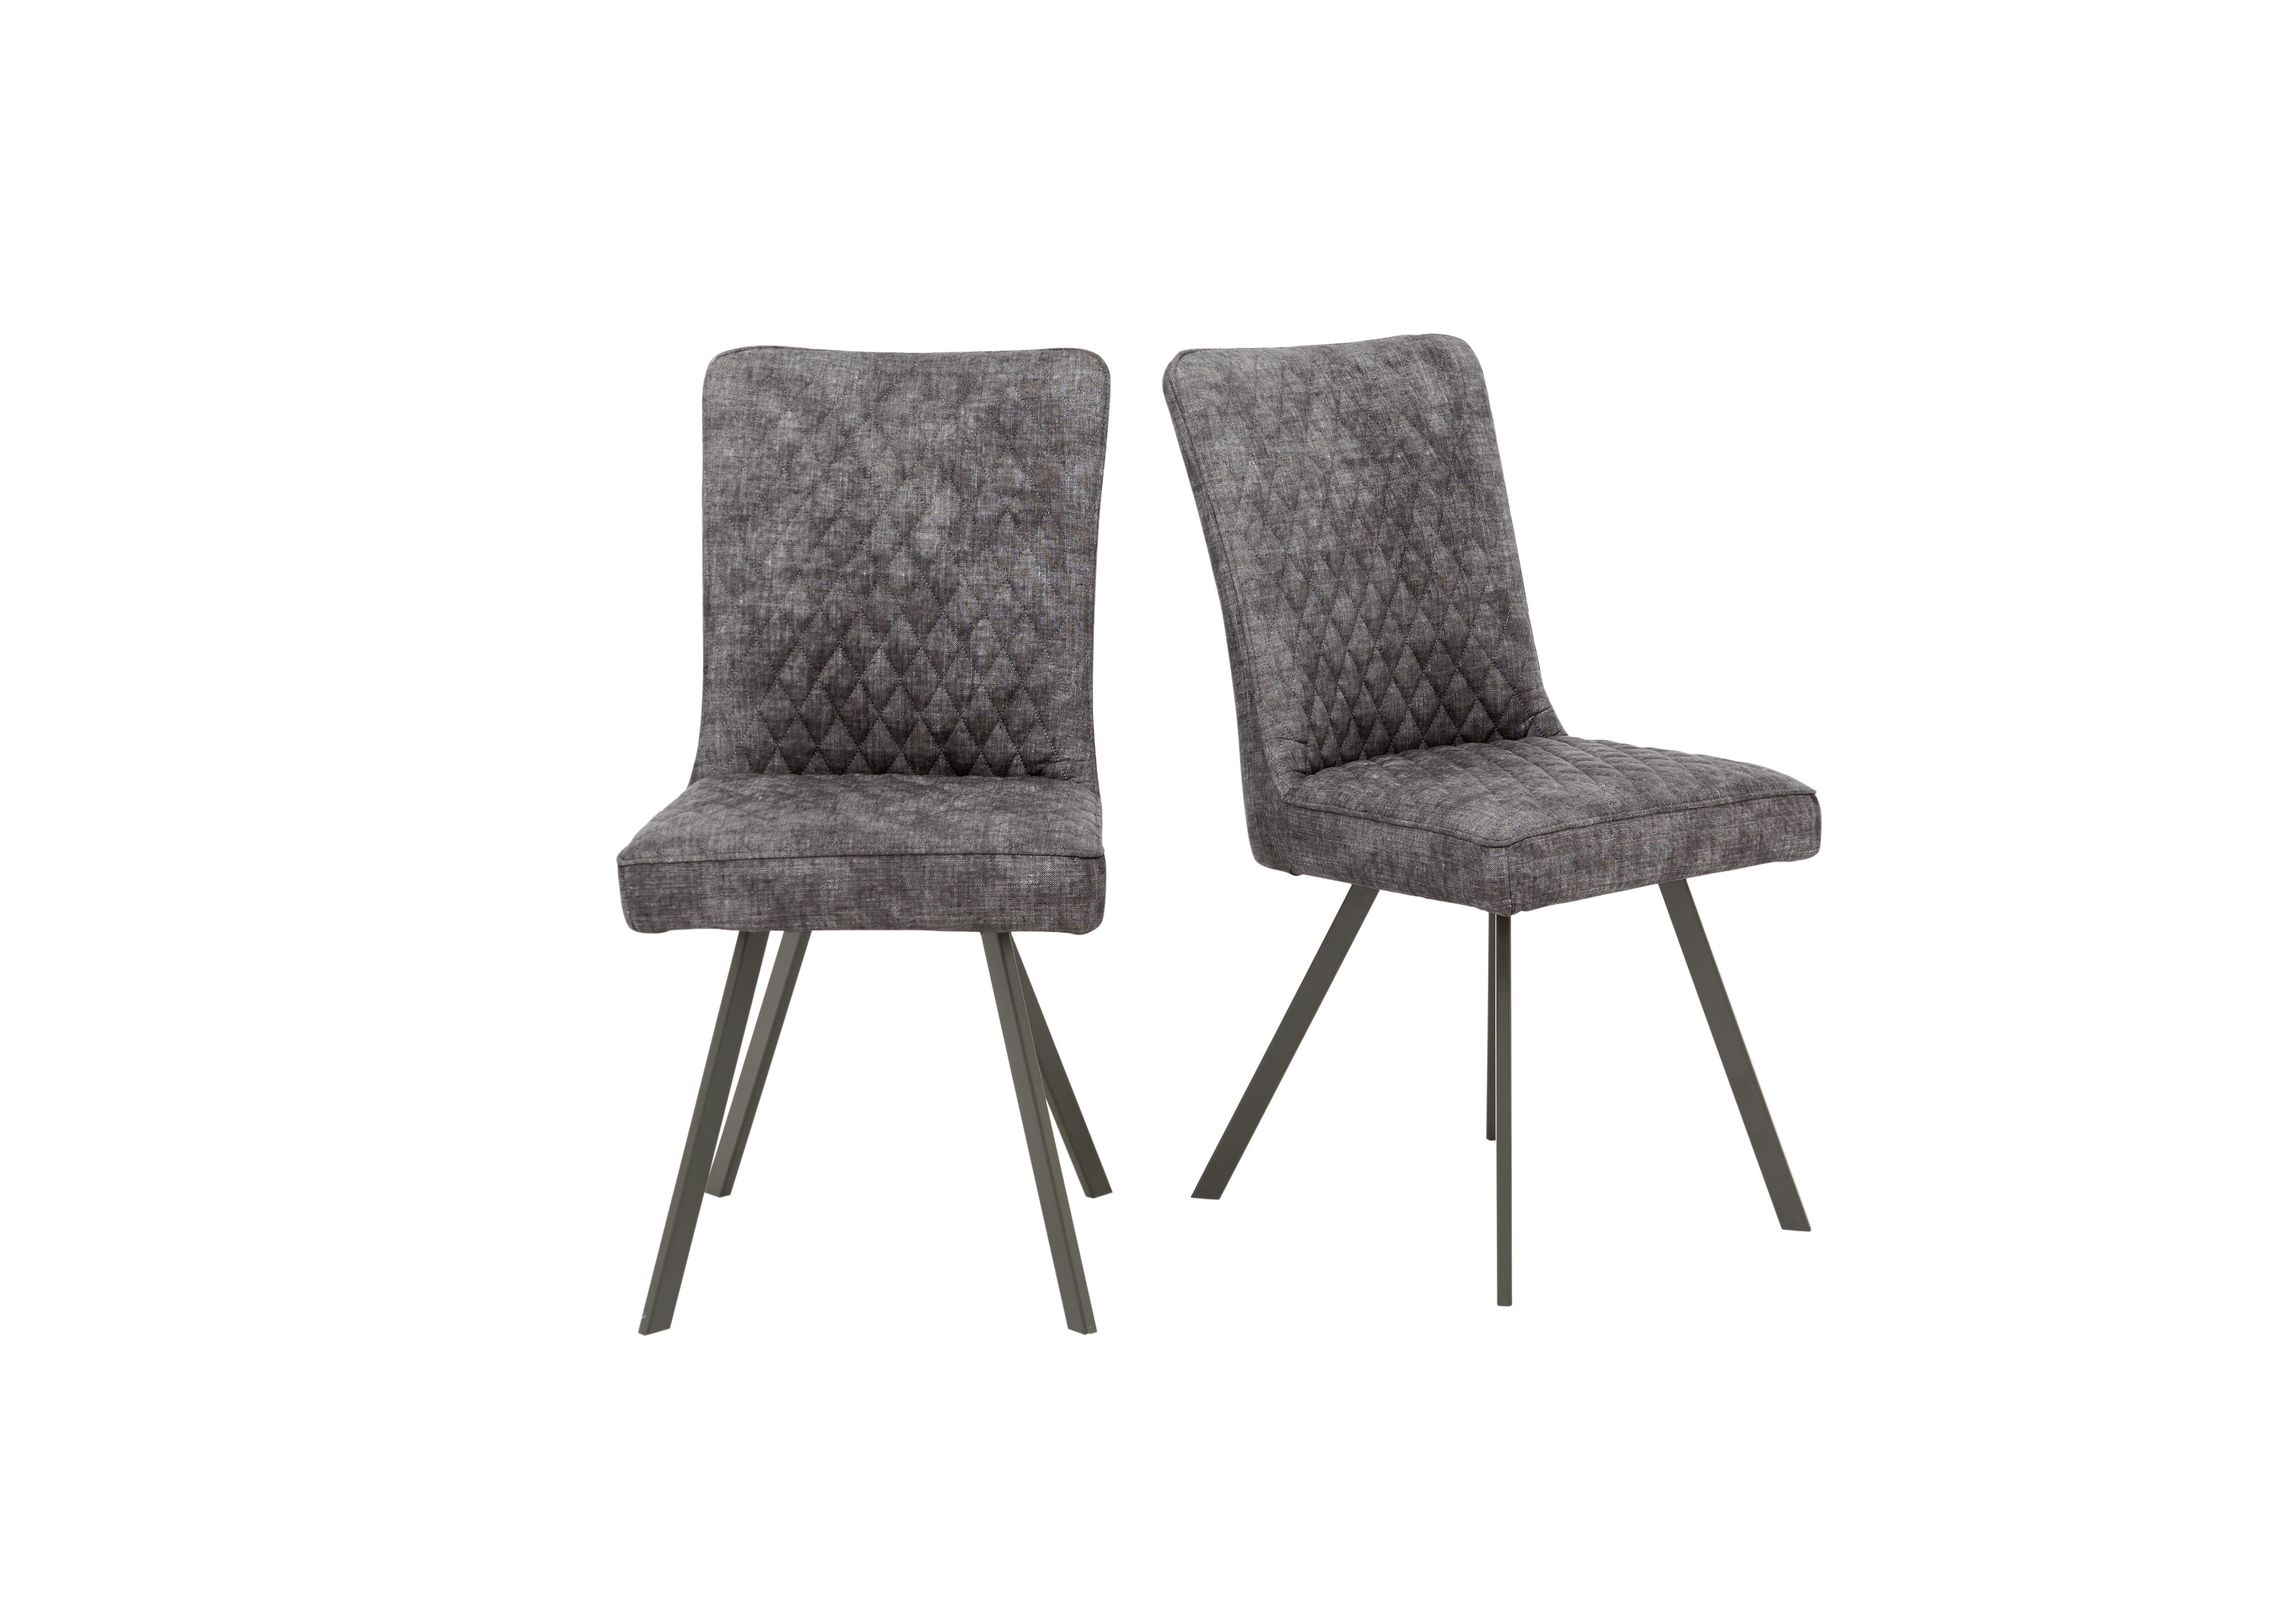 Earth Pair of Dining Chairs in Graphite on Furniture Village